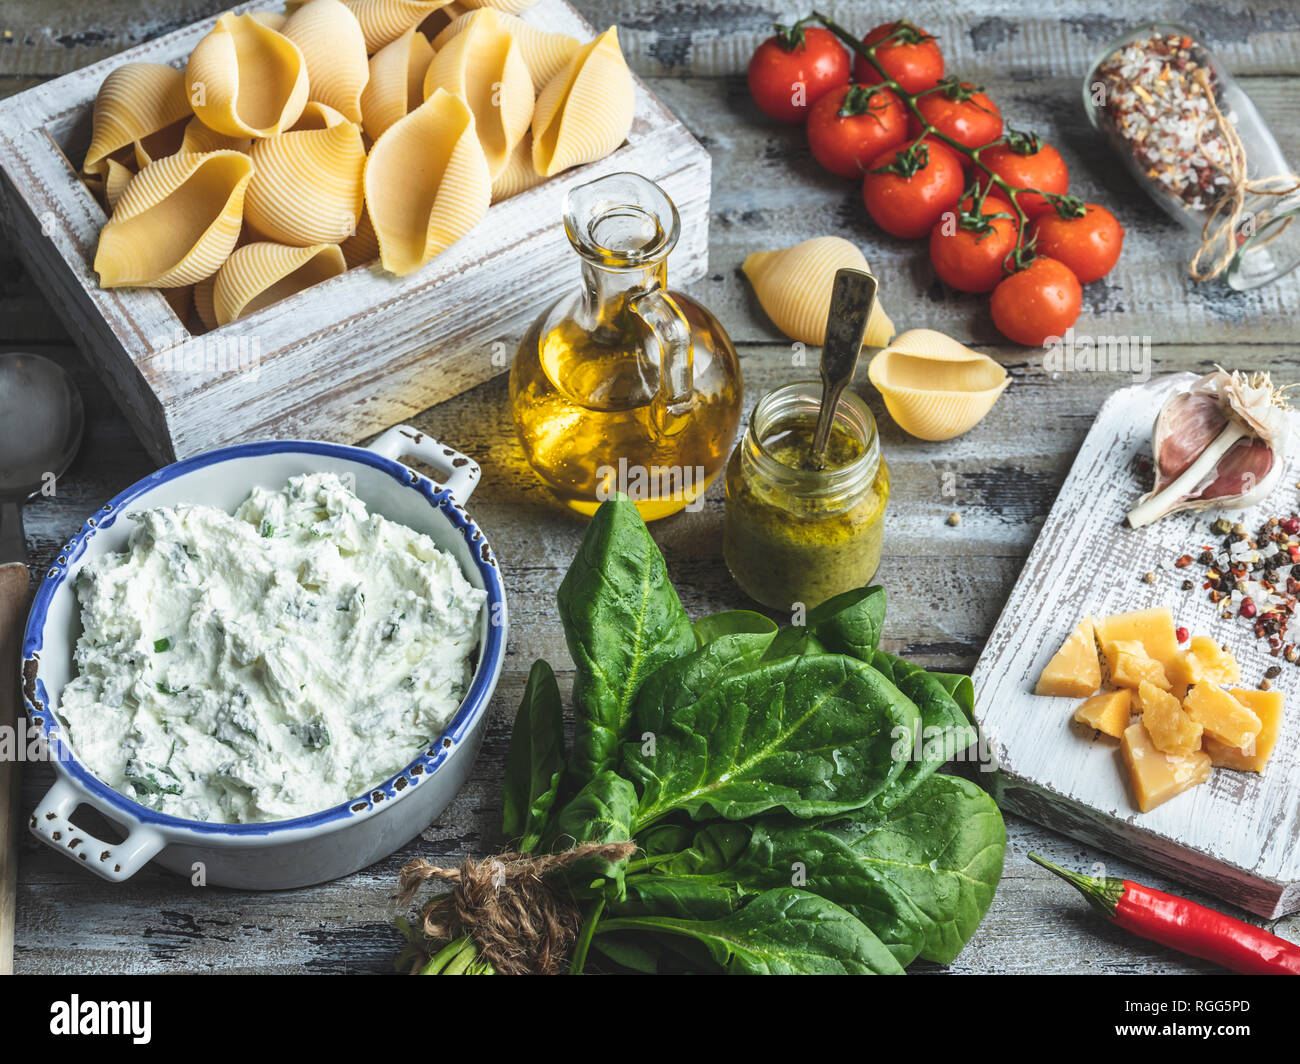 Ingredients for cooking pasta. Conchiglioni, spinach leaves, cherry tomatoes, parmesan cheese, cream cheese, olive oil, salt, garlic, rustic style, wo Stock Photo